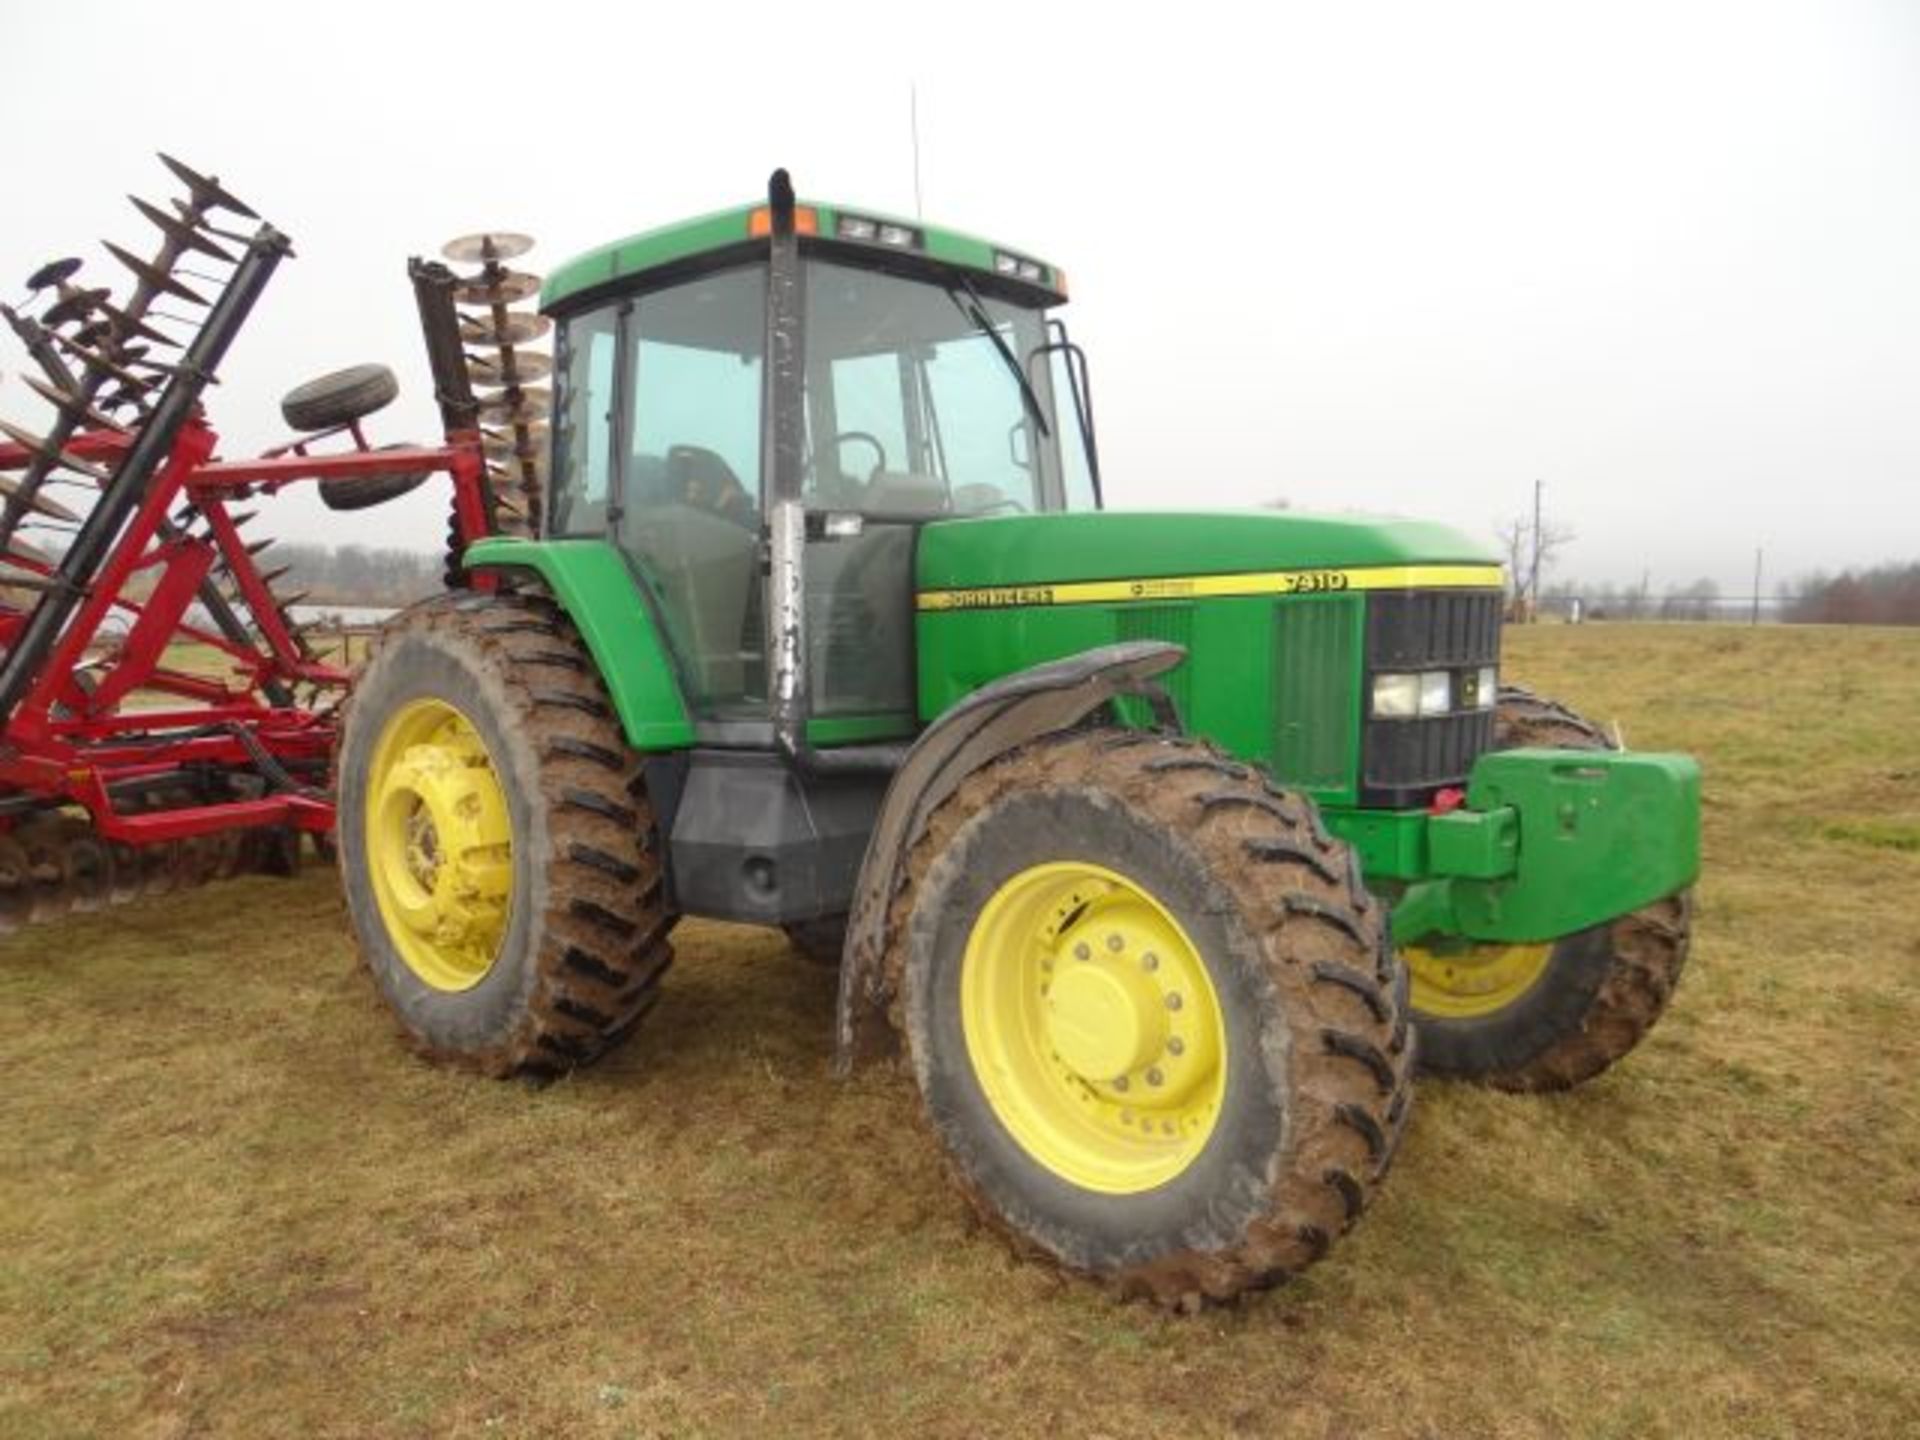 JD 7410 Tractor, 1999 - Image 2 of 5